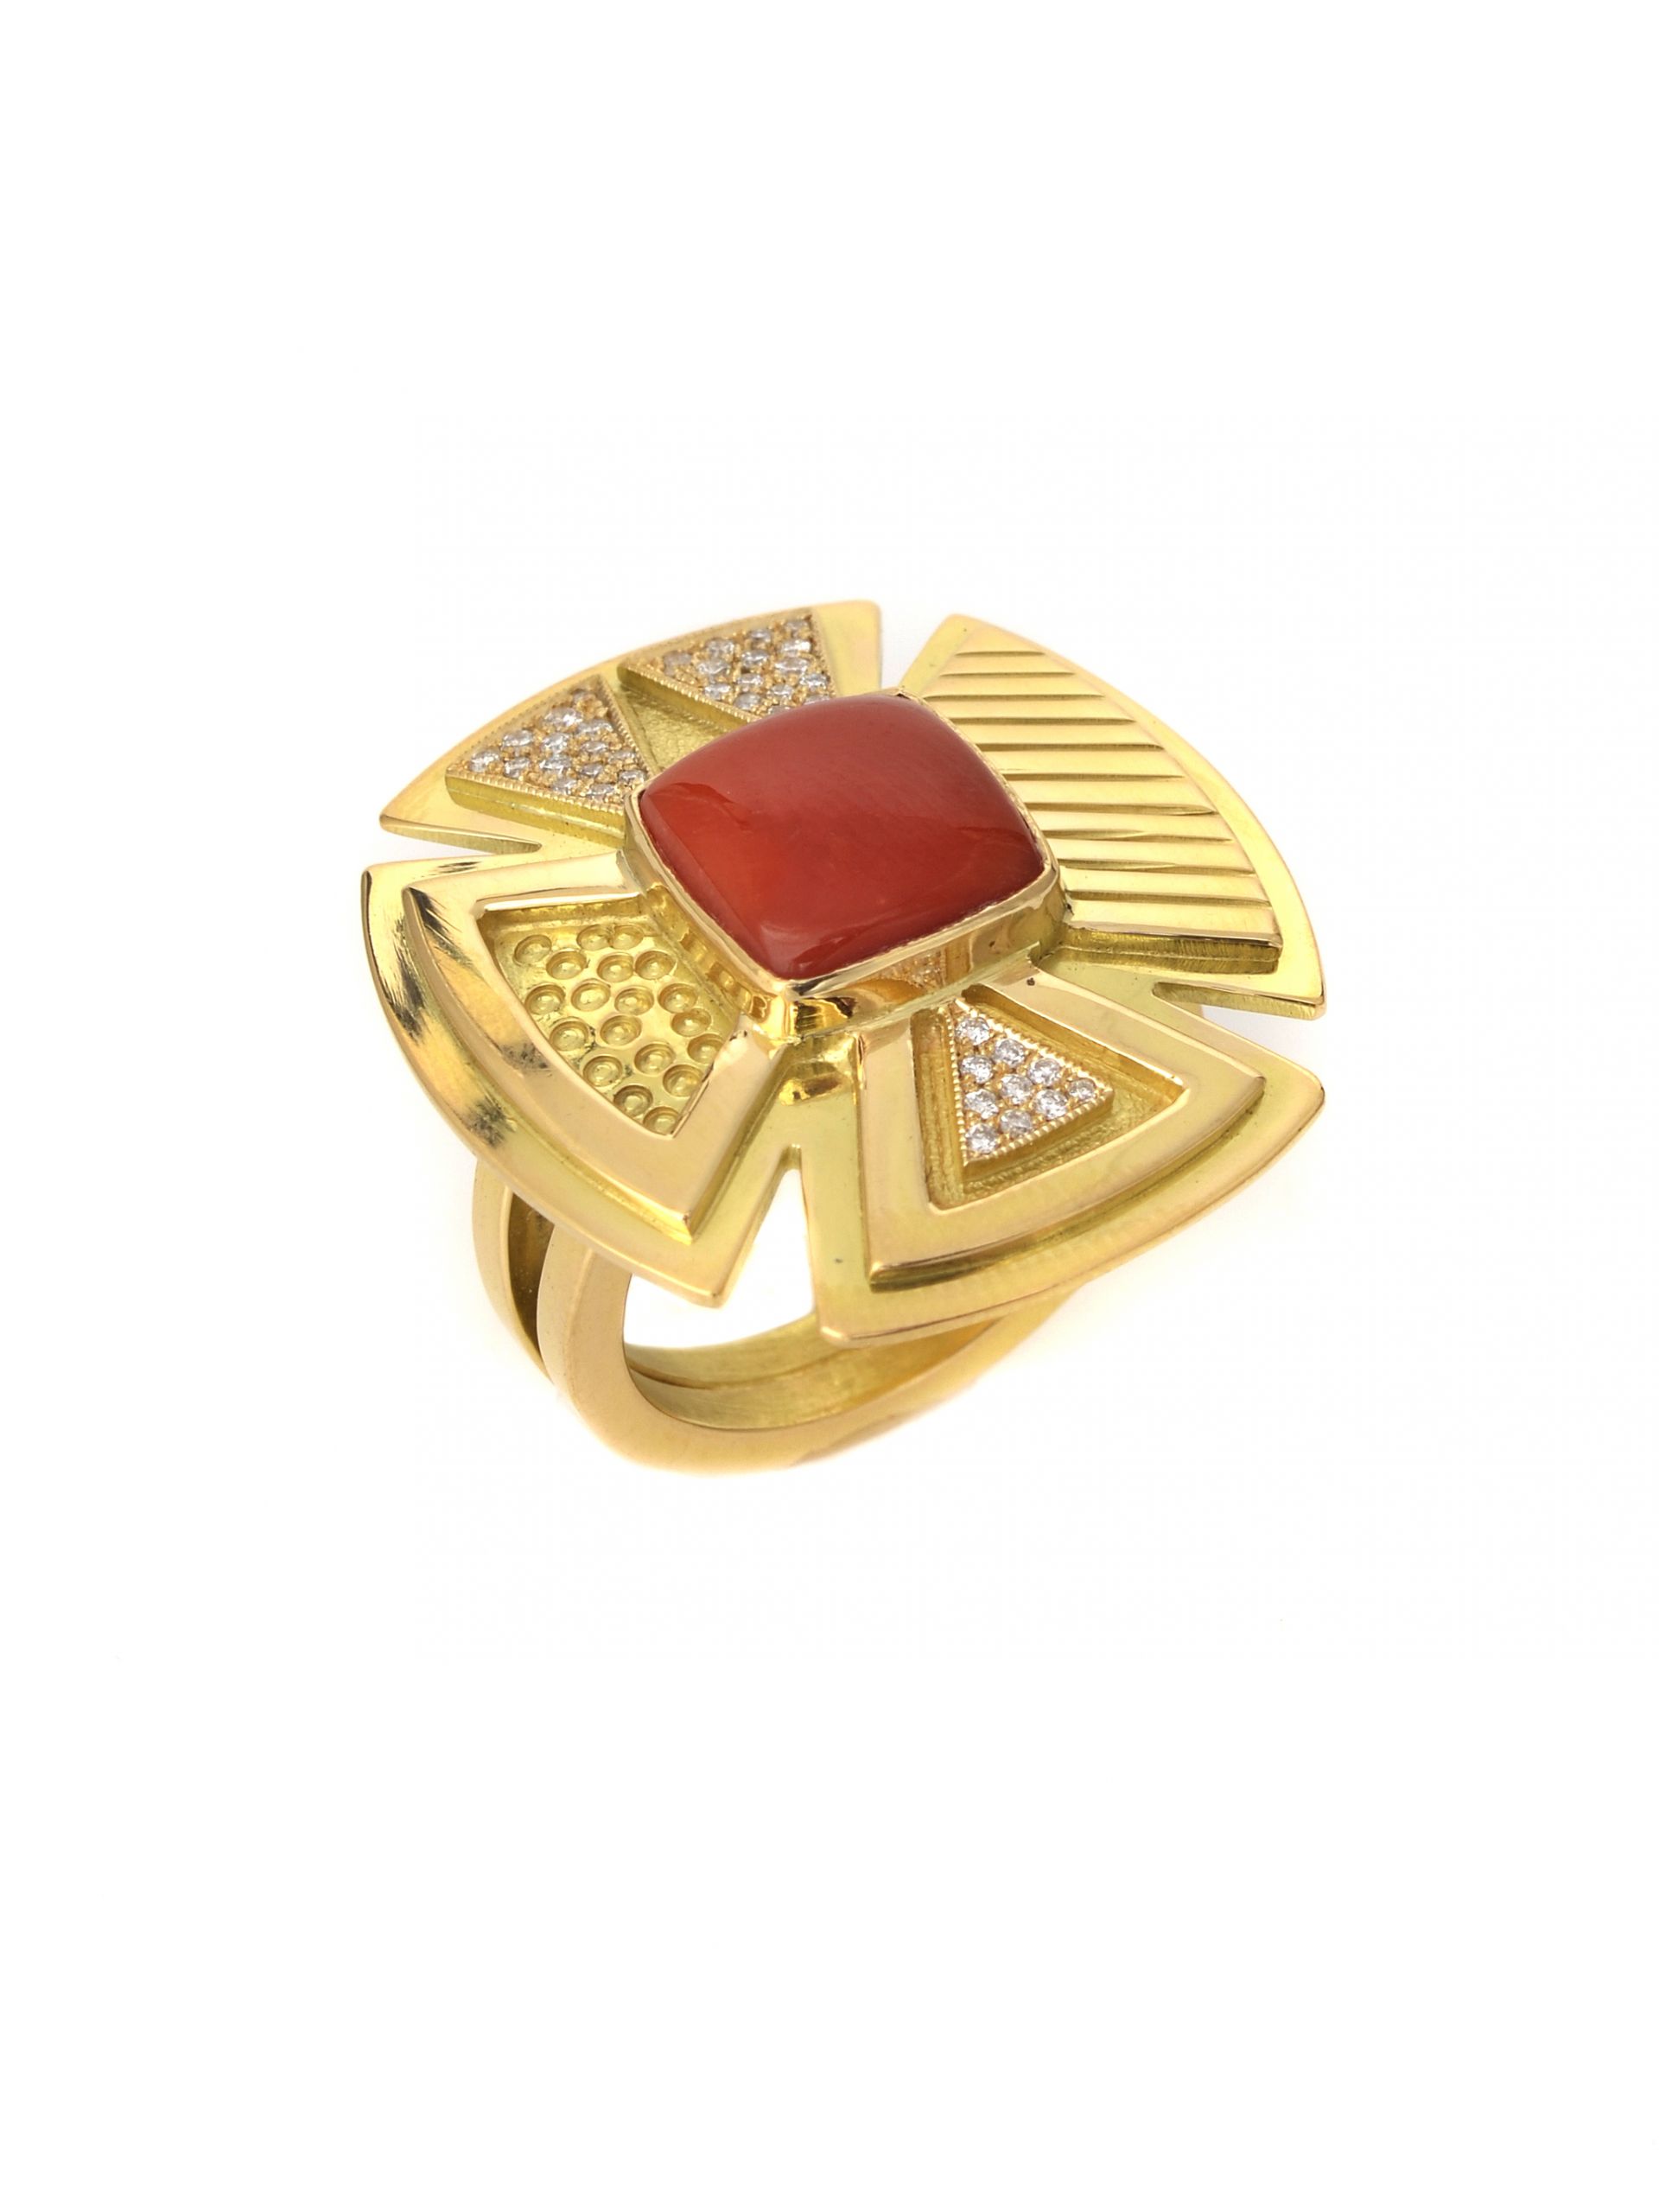 Buy Red coral ring, Oval cabochon sterling silver gemstone ring online at  aStudio1980.com